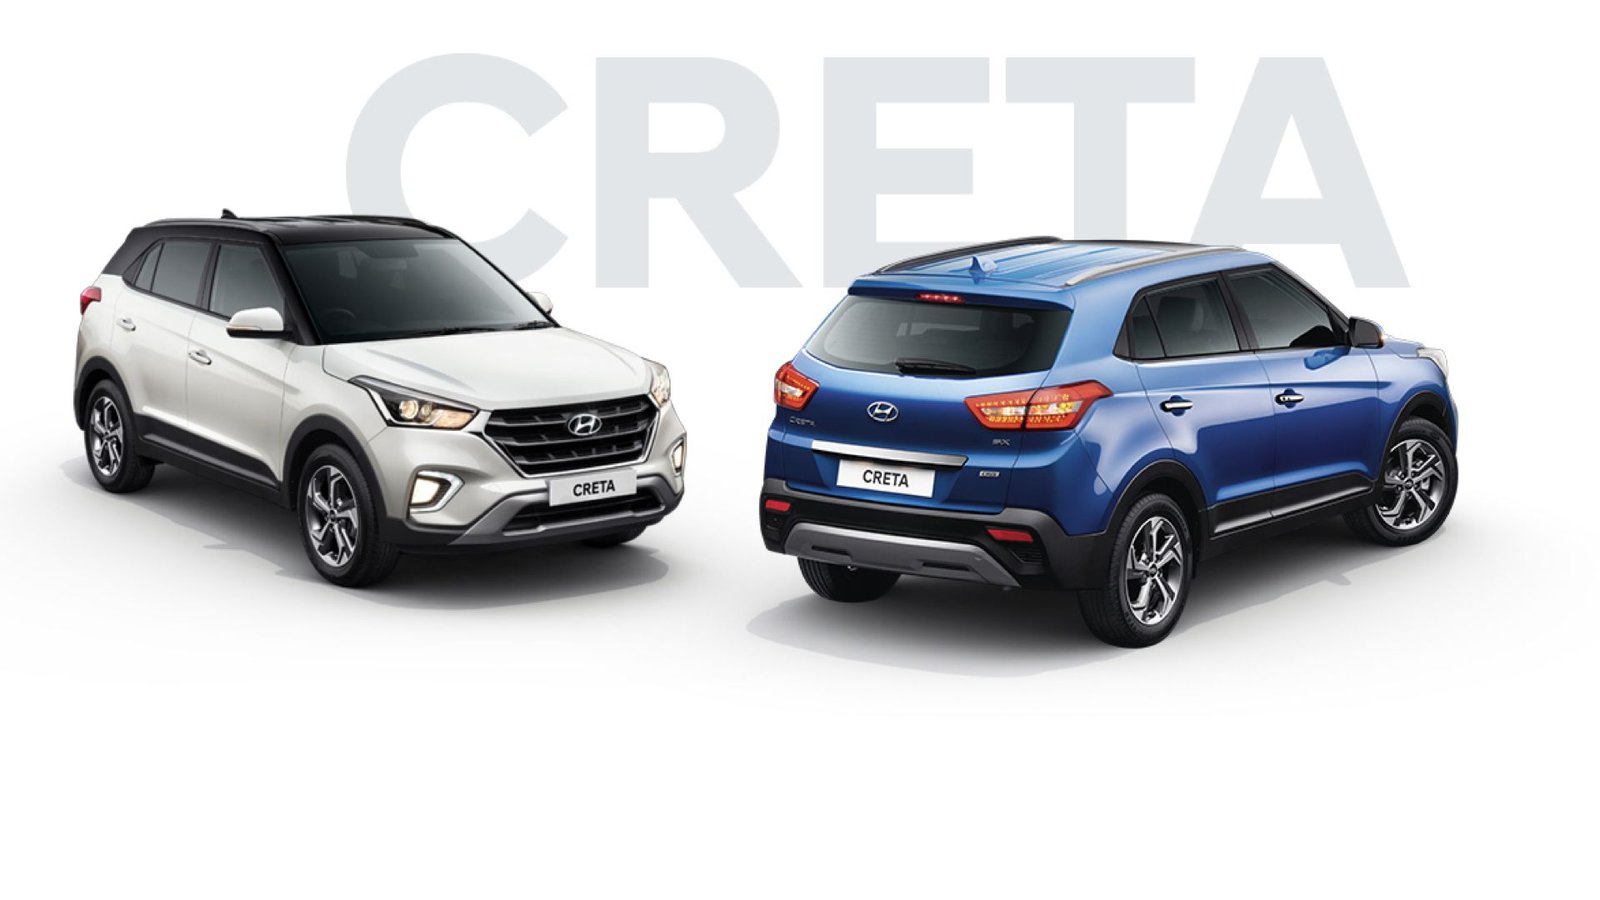 Hyundai Creta to get New EX Variant with more features before